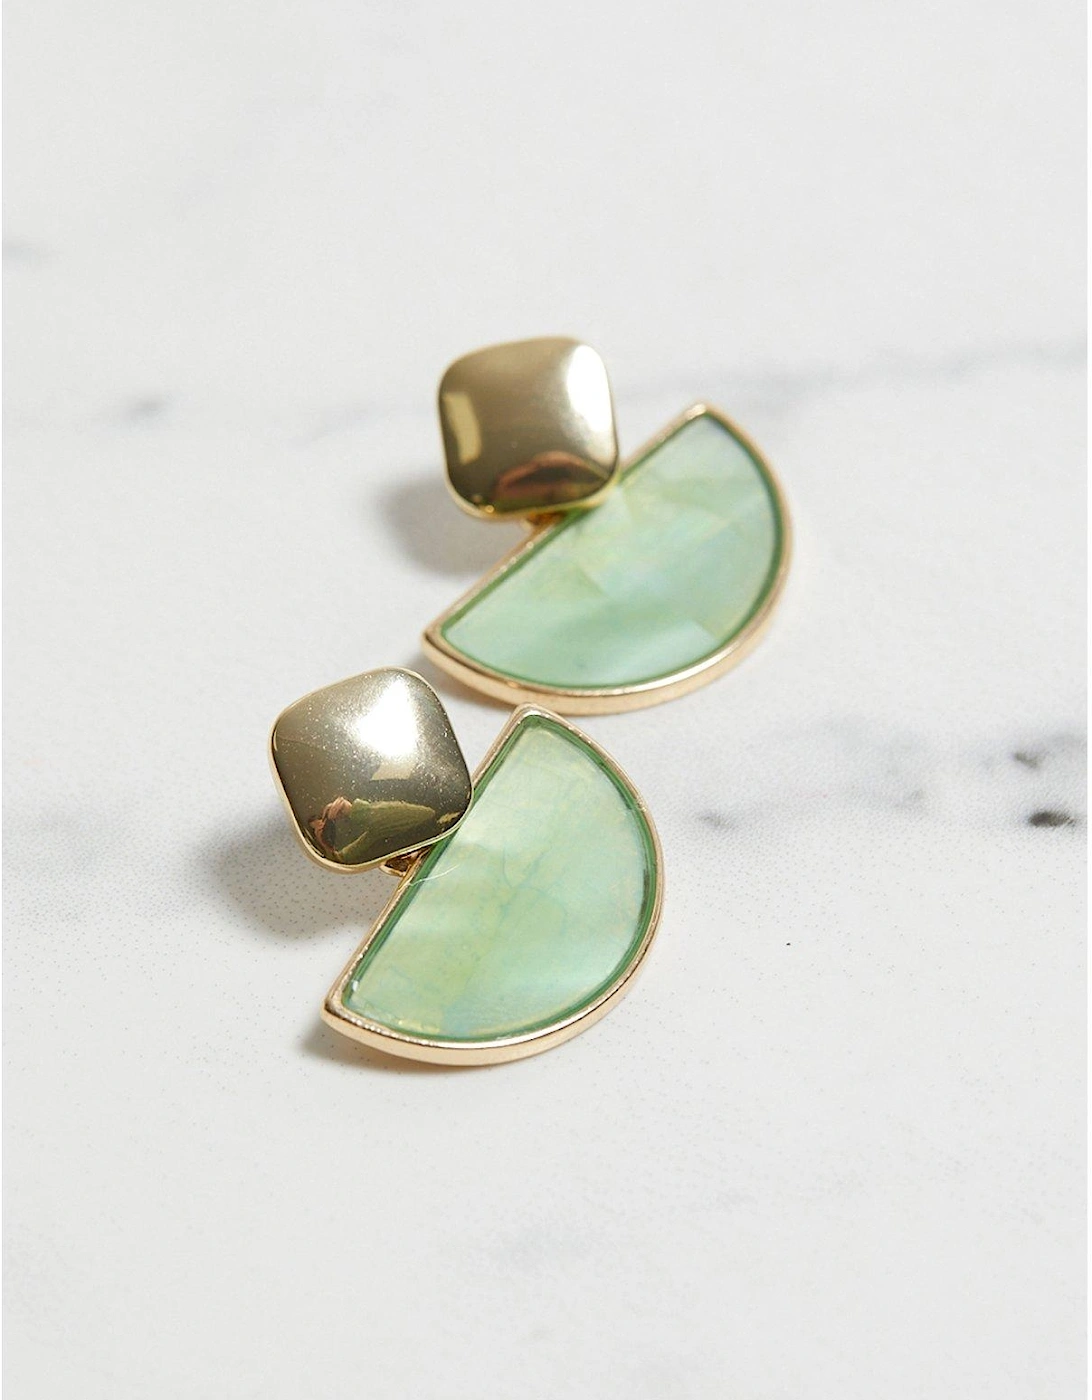 GOLD TEAL RESIN ABSTRACT DOUBLE DROP EARRING